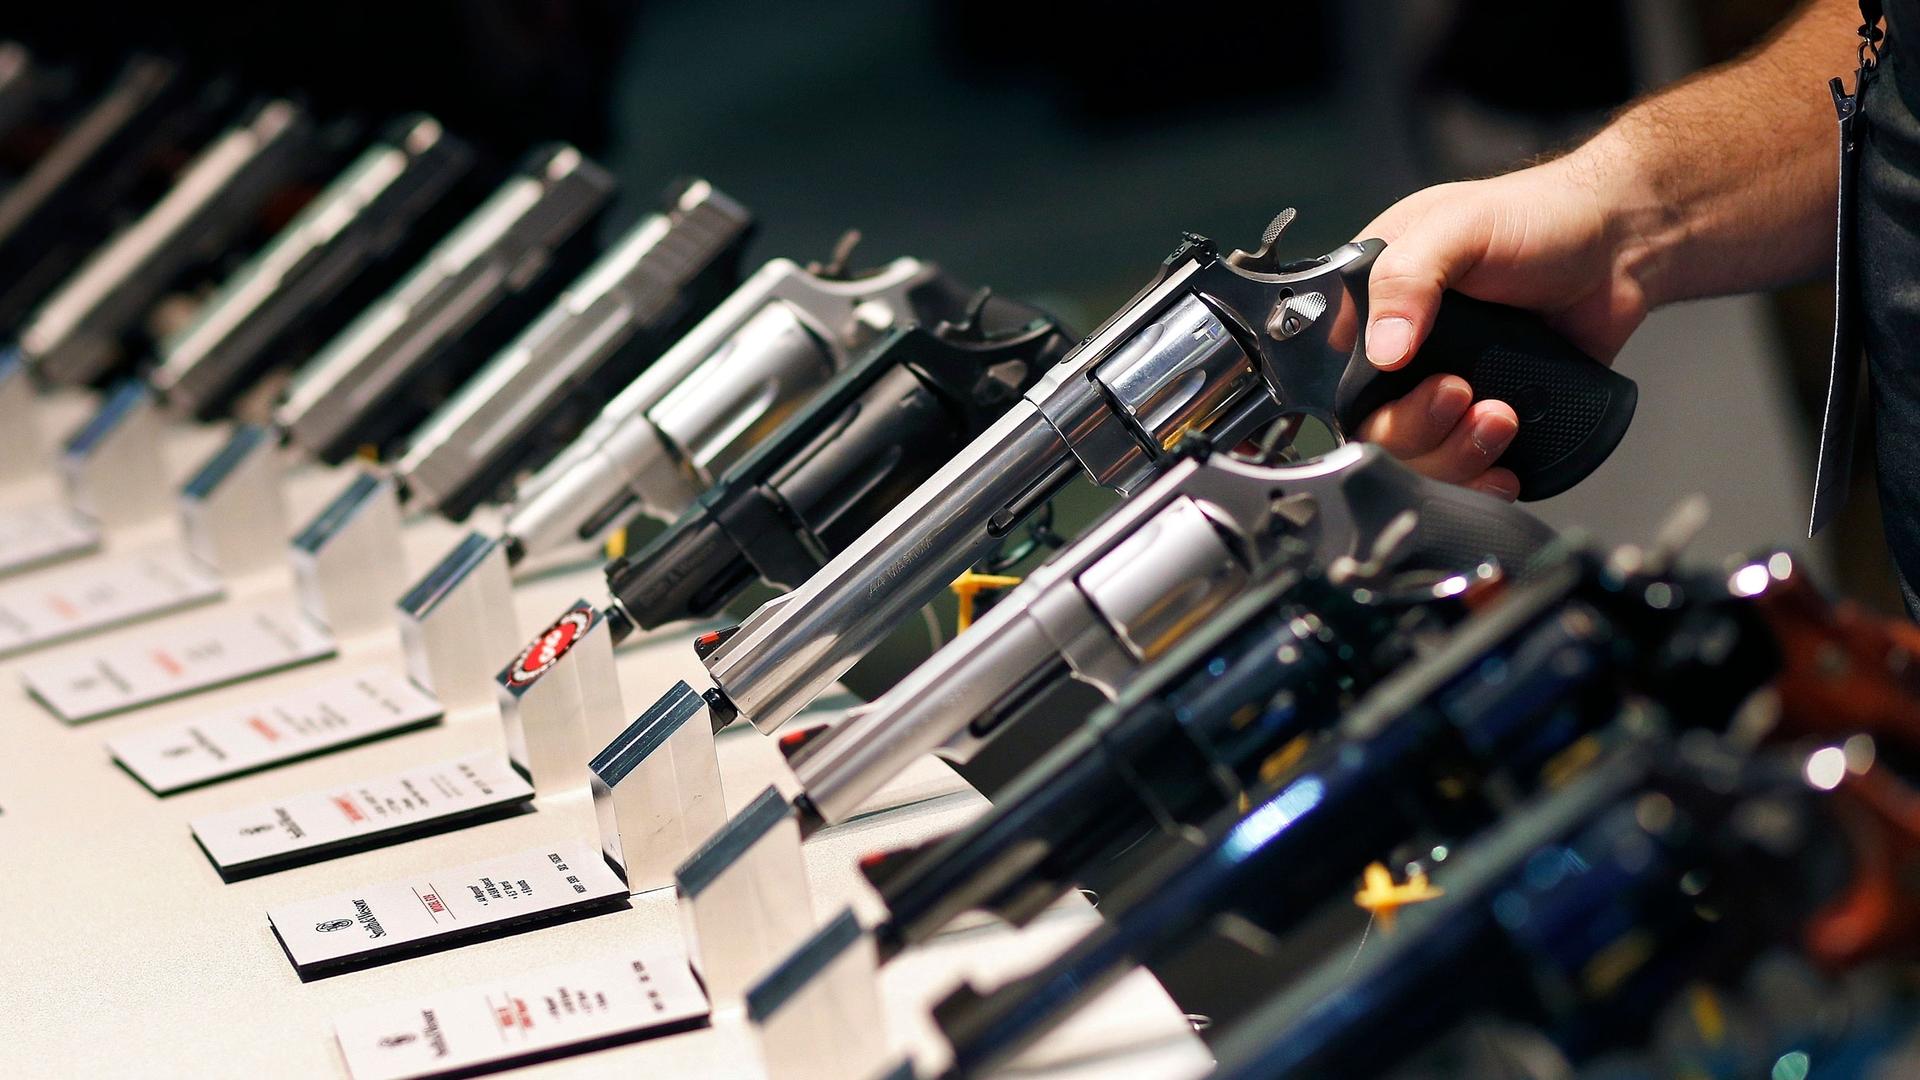 A row of handguns are shown with the handle facing outward and a hand holding on to one of the weapons.